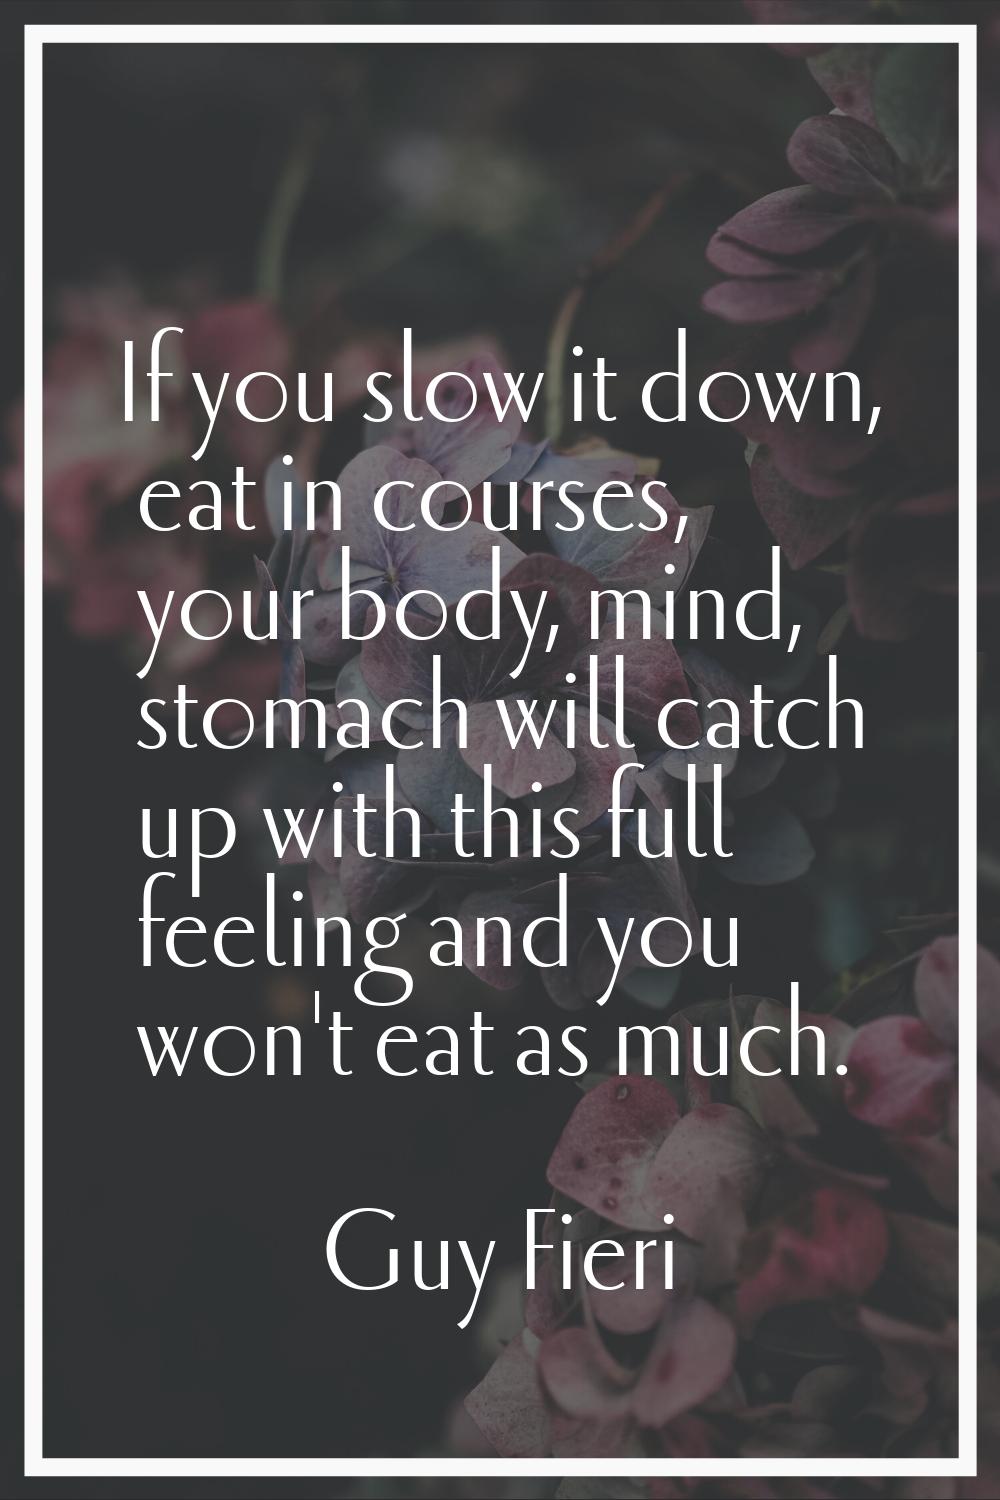 If you slow it down, eat in courses, your body, mind, stomach will catch up with this full feeling 